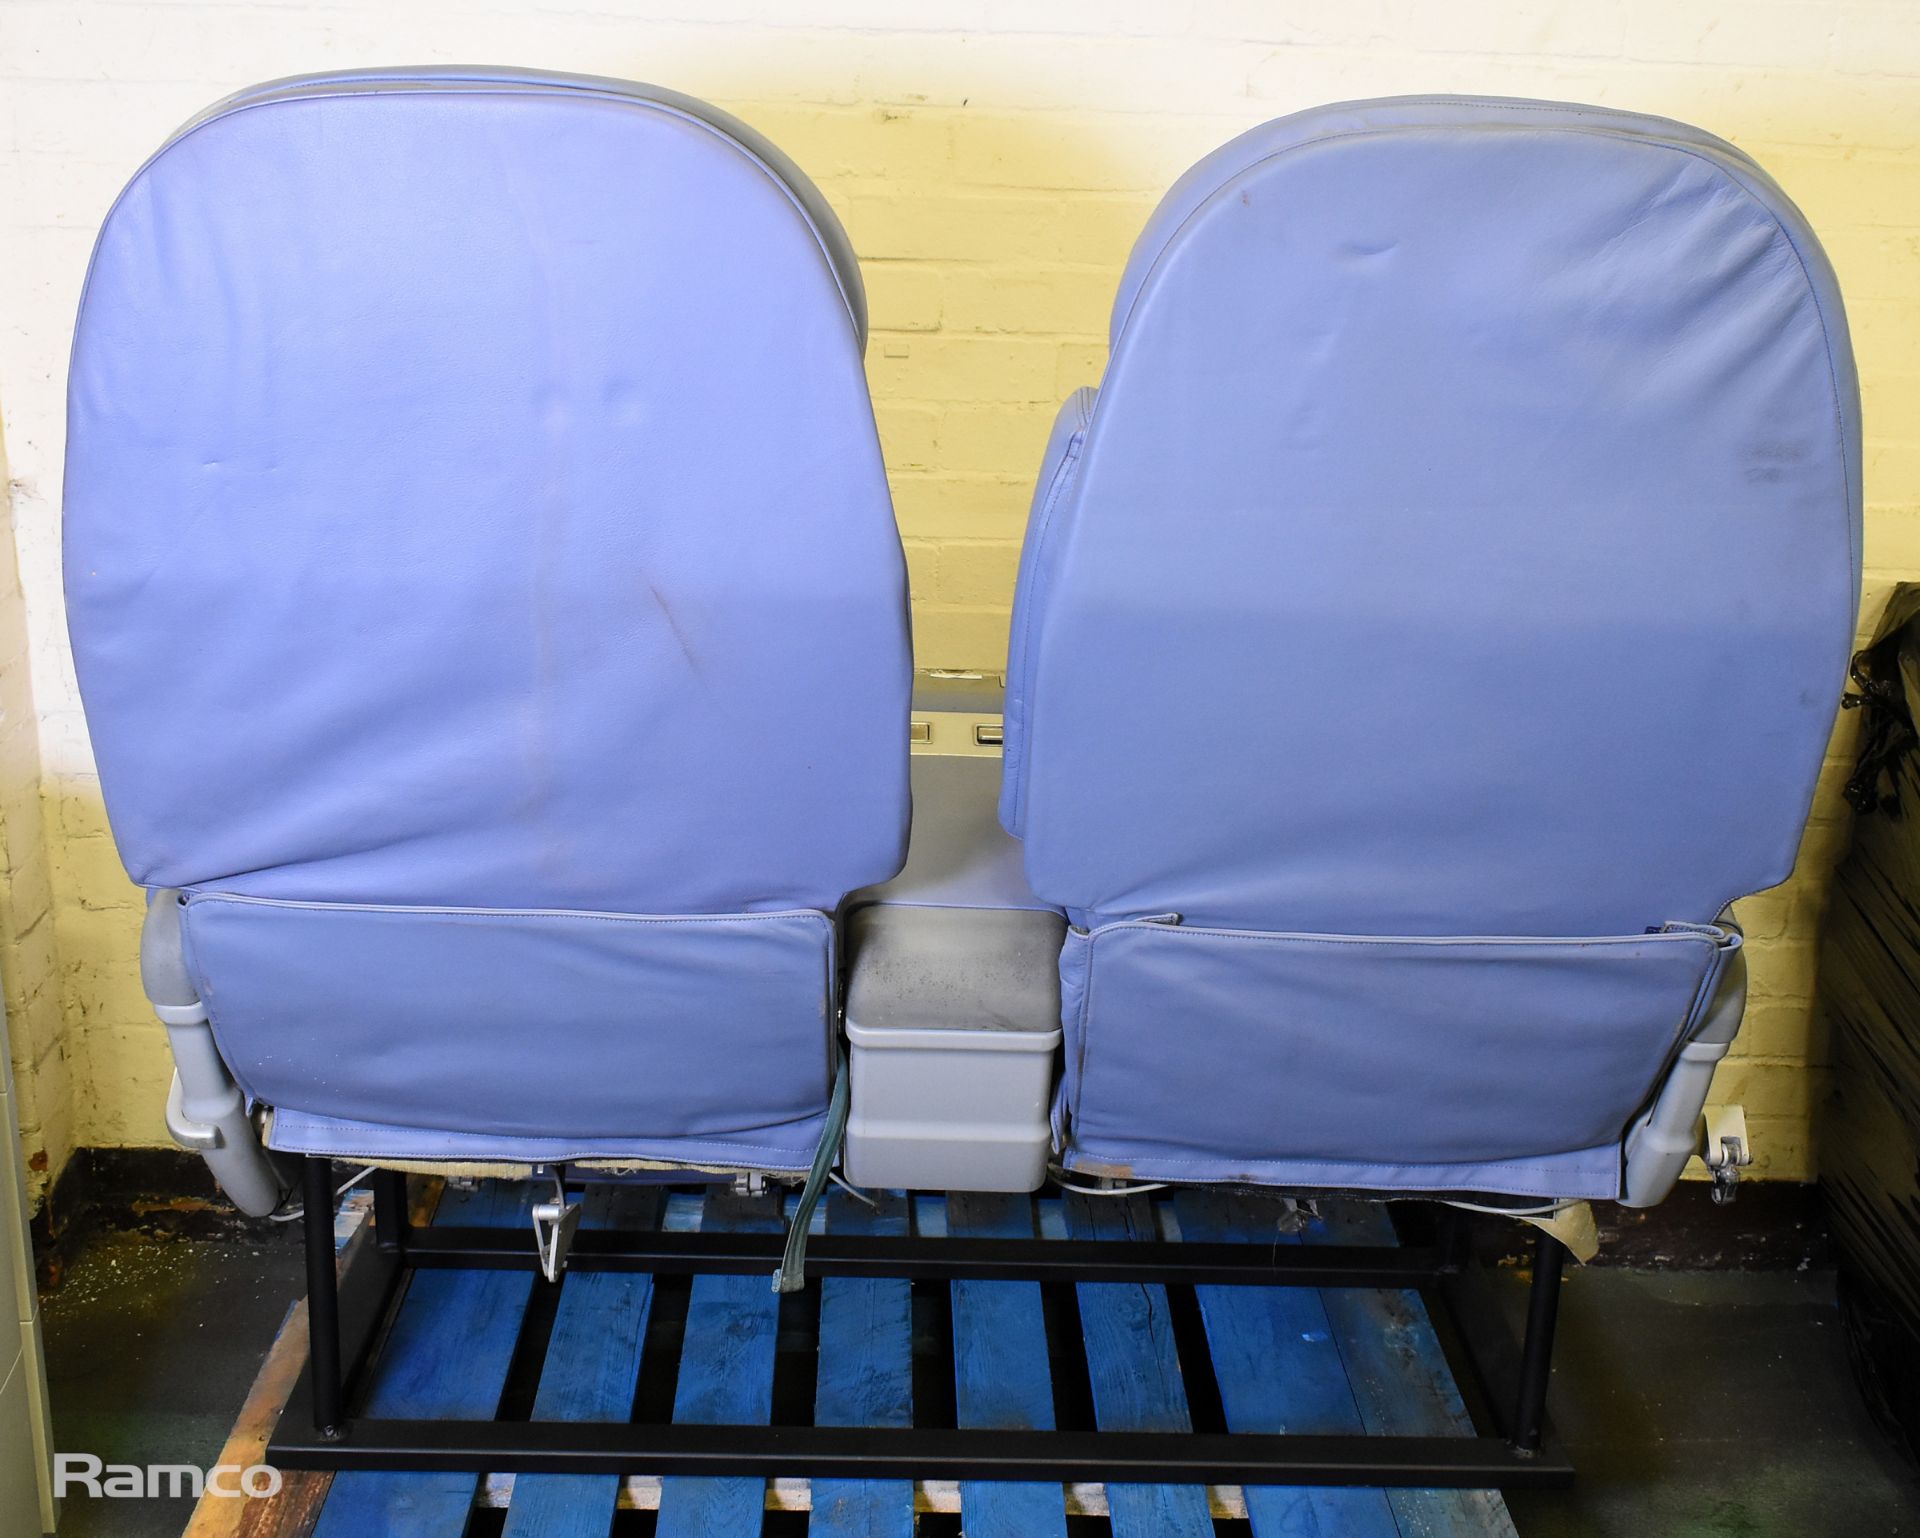 Pair of aircraft seats - W 1300 x D 770 x H 1200mm - Image 5 of 8